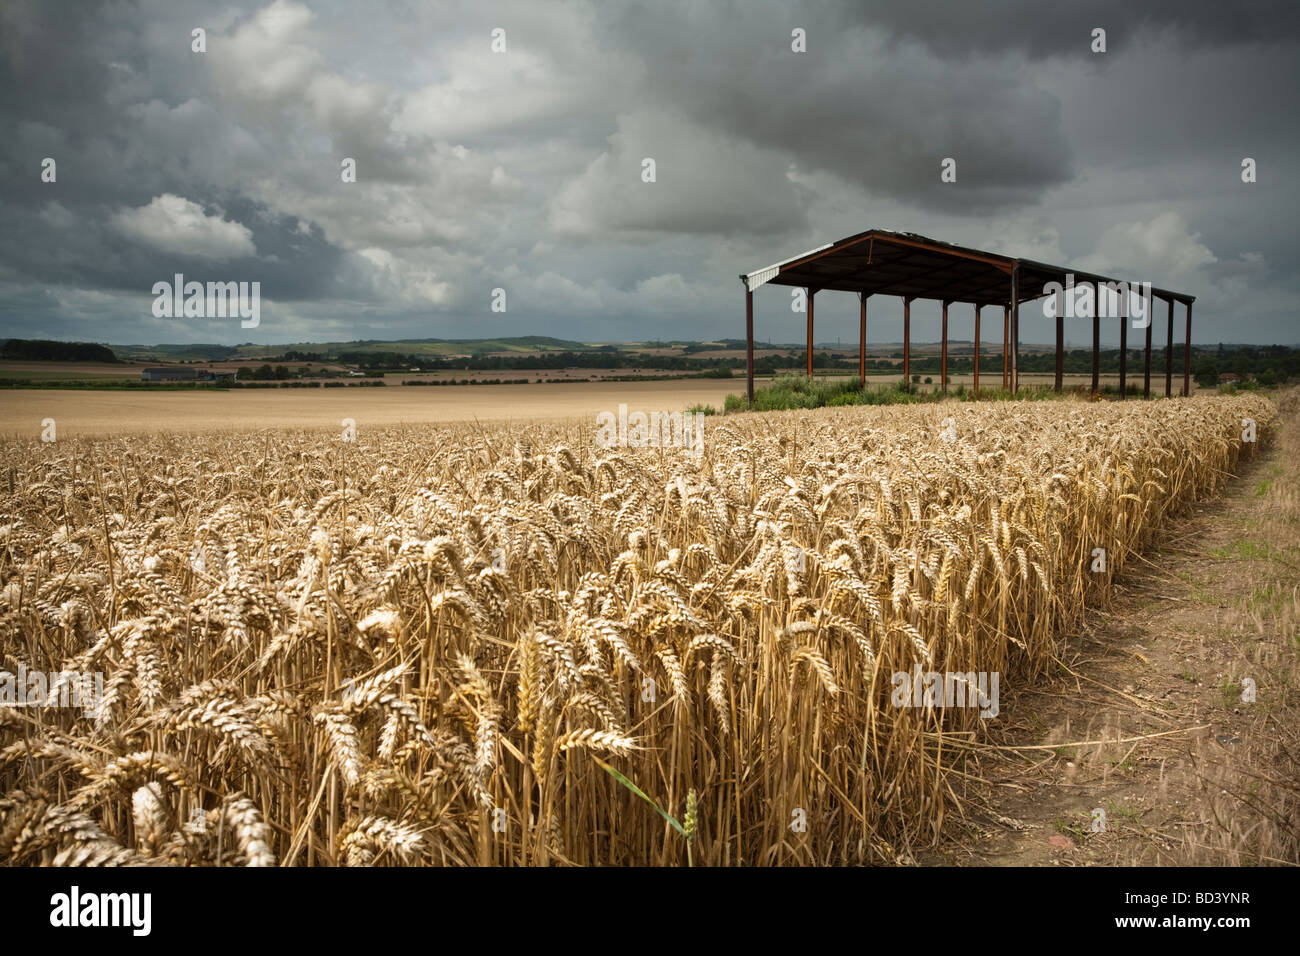 Wheat field overlooking the Thames Valley between Ipsden and North Stoke in Oxfordshire Uk Stock Photo